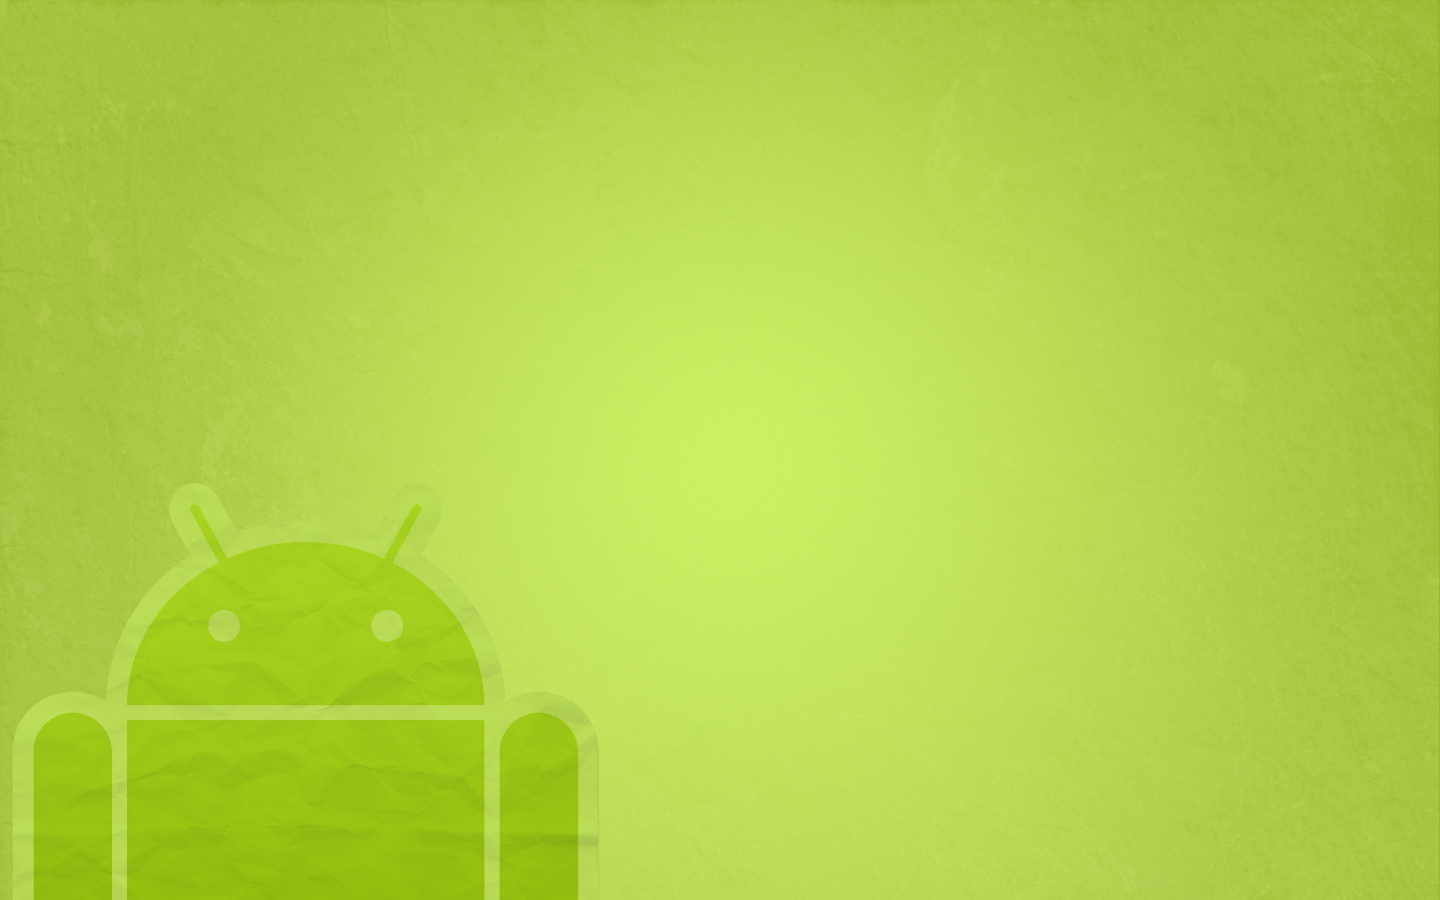 Android Logo Wallpaper Hq Best